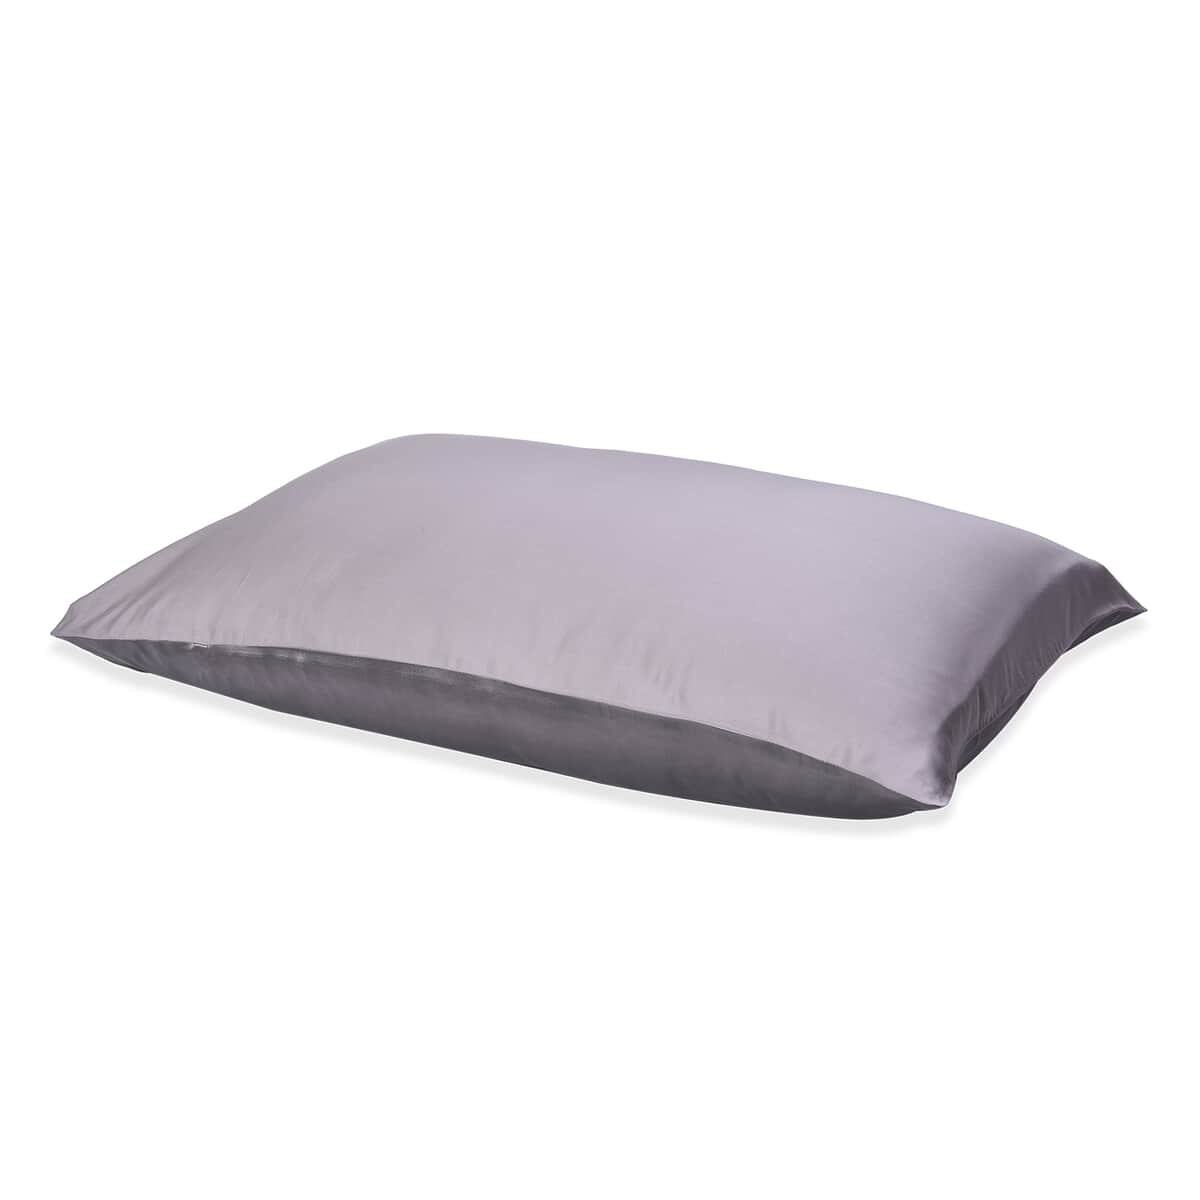 Symphony Home Gray 100% Mulberry Silk Pillowcase Infused with Hyaluronic Acid & Argan Oil - King, Pillow Protectors, Pillow Cover, Cushion Cover, Pillow Shams, Pillow Case Covers image number 1